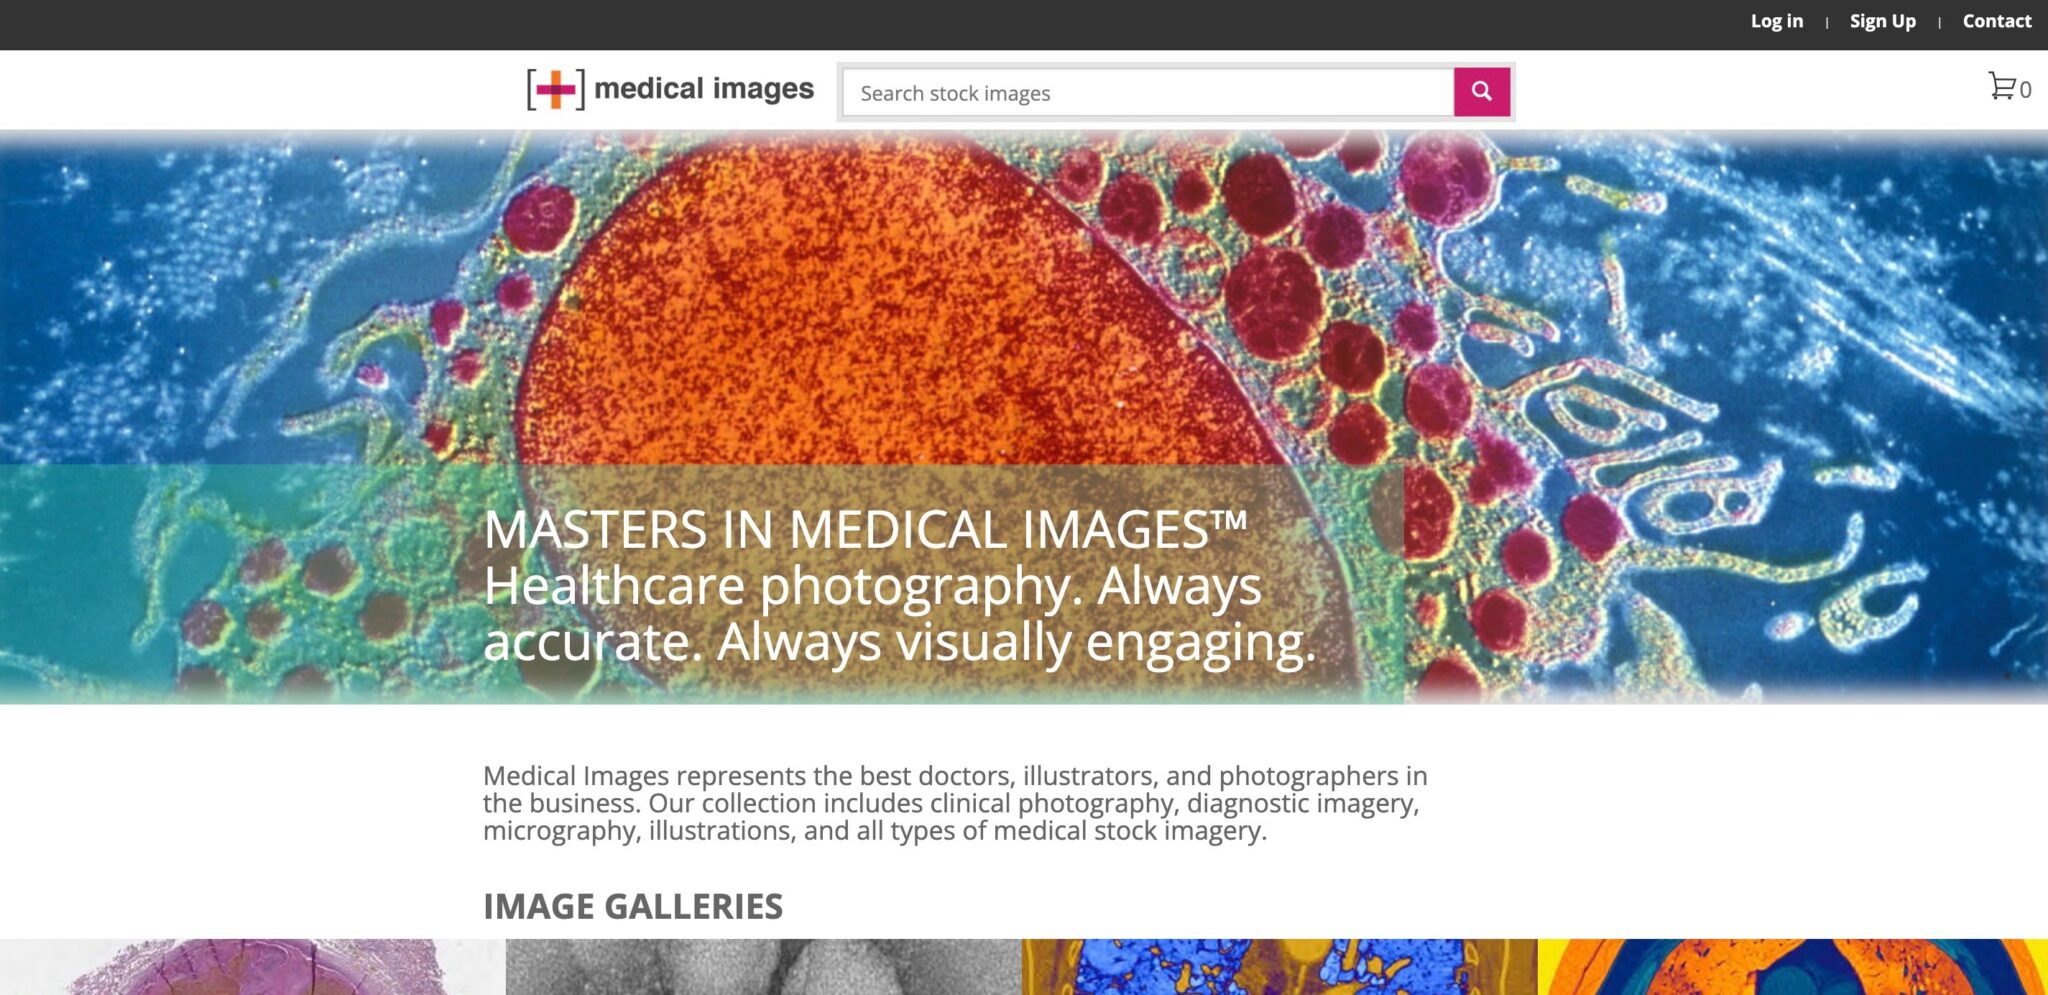 Example of medical images stock photo website